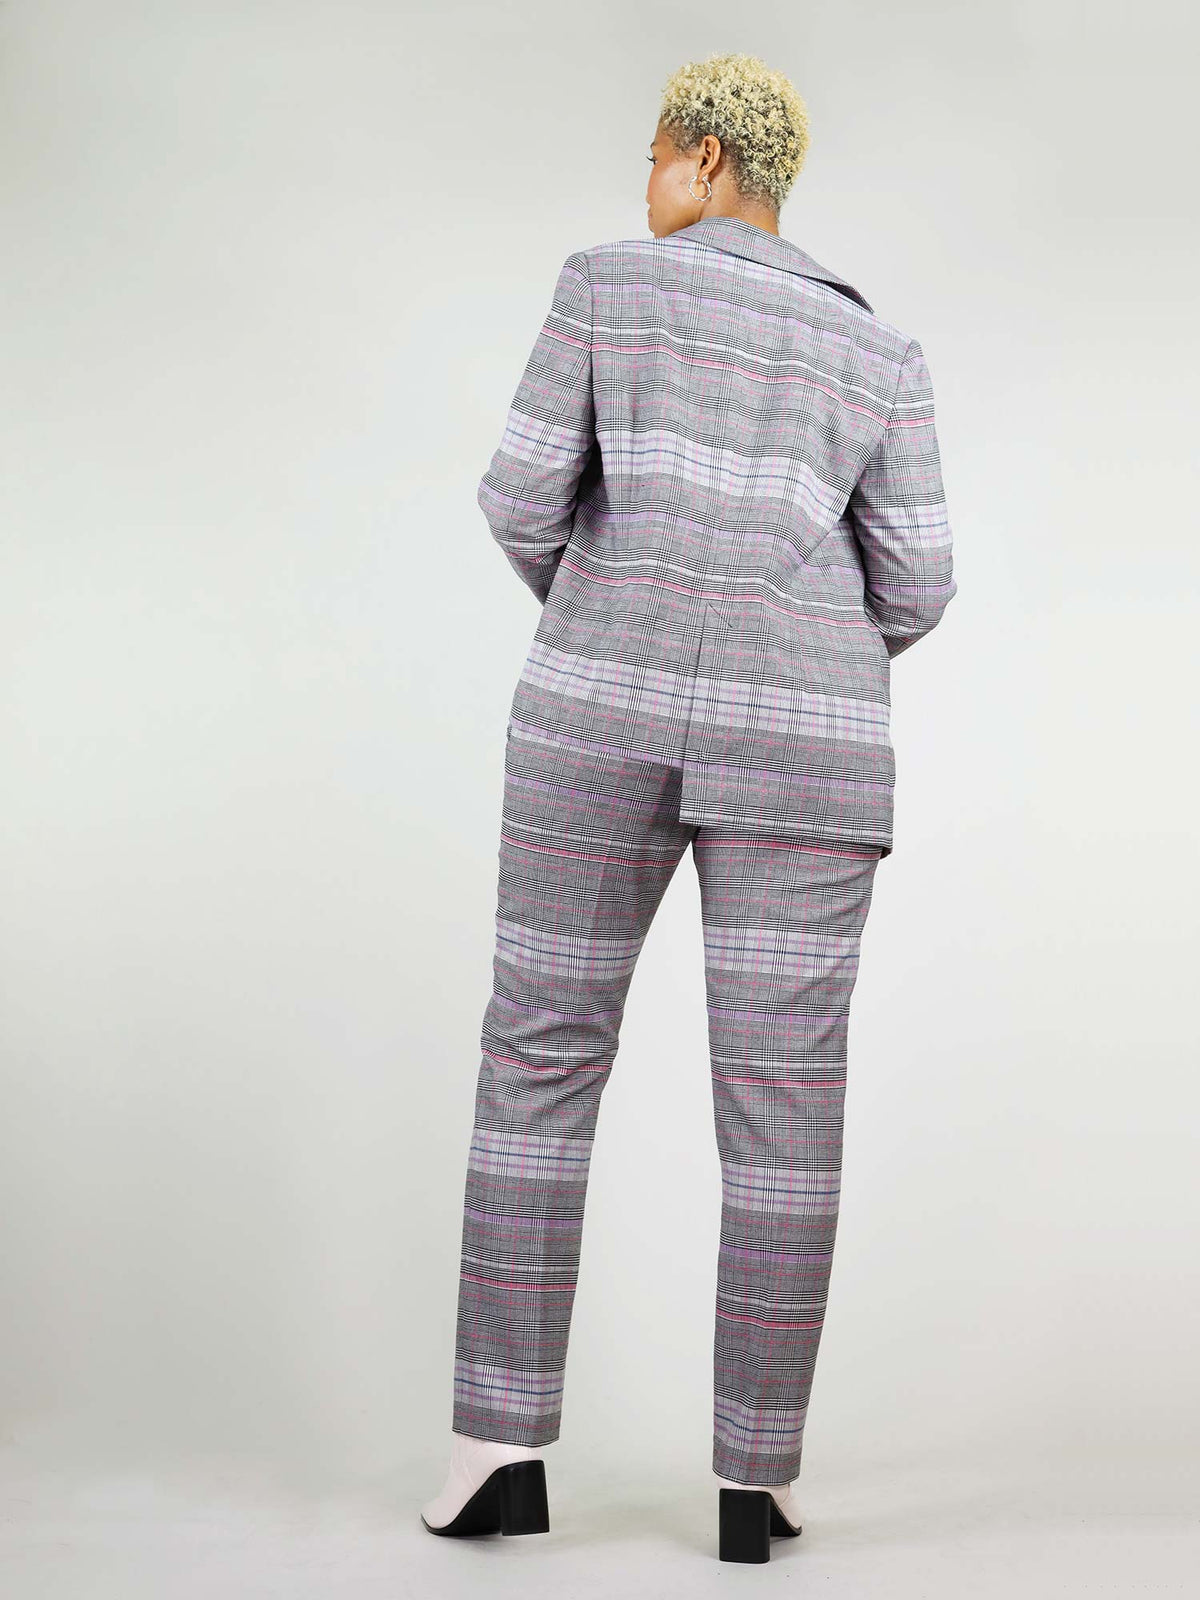 Back of the reivivify blazer in size XL. It has a boxy and asymmetric shape, with one side shorter than the other. Main colours pink and grey.